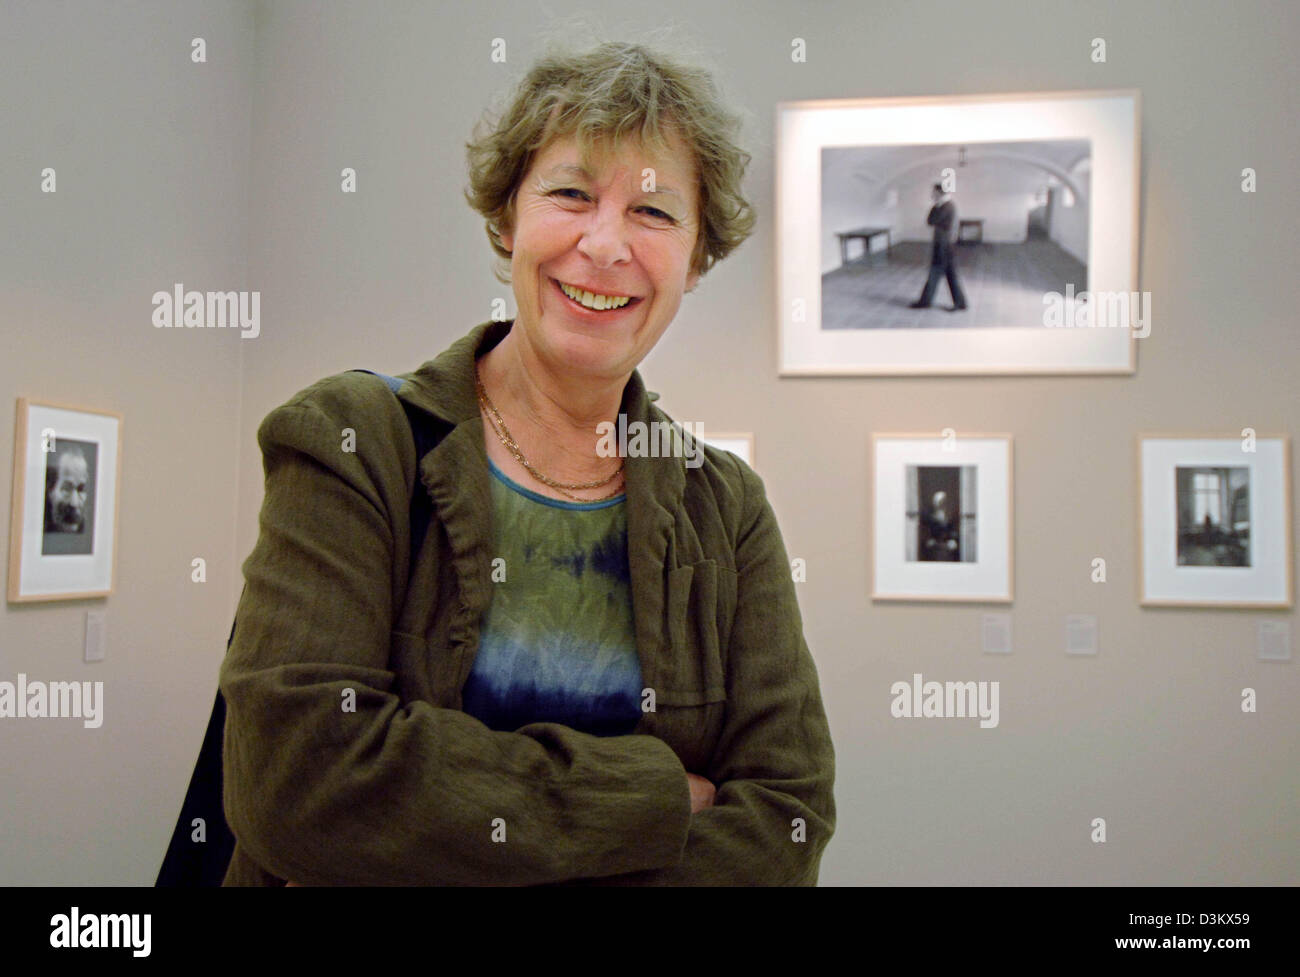 (dpa) - Photographer Barbara Klemm poses in her exhibition in the House of Photography in Hamburg, Germany, 20 September 2005. Seventy portraits of celebrities photographed by Klemm in a unsual manner are featured in the exhibition running from 21 September 2005 to 8 January 2006 in the Deichtorhalls in Hamburg. Photo: Maurizio Gambarini Stock Photo